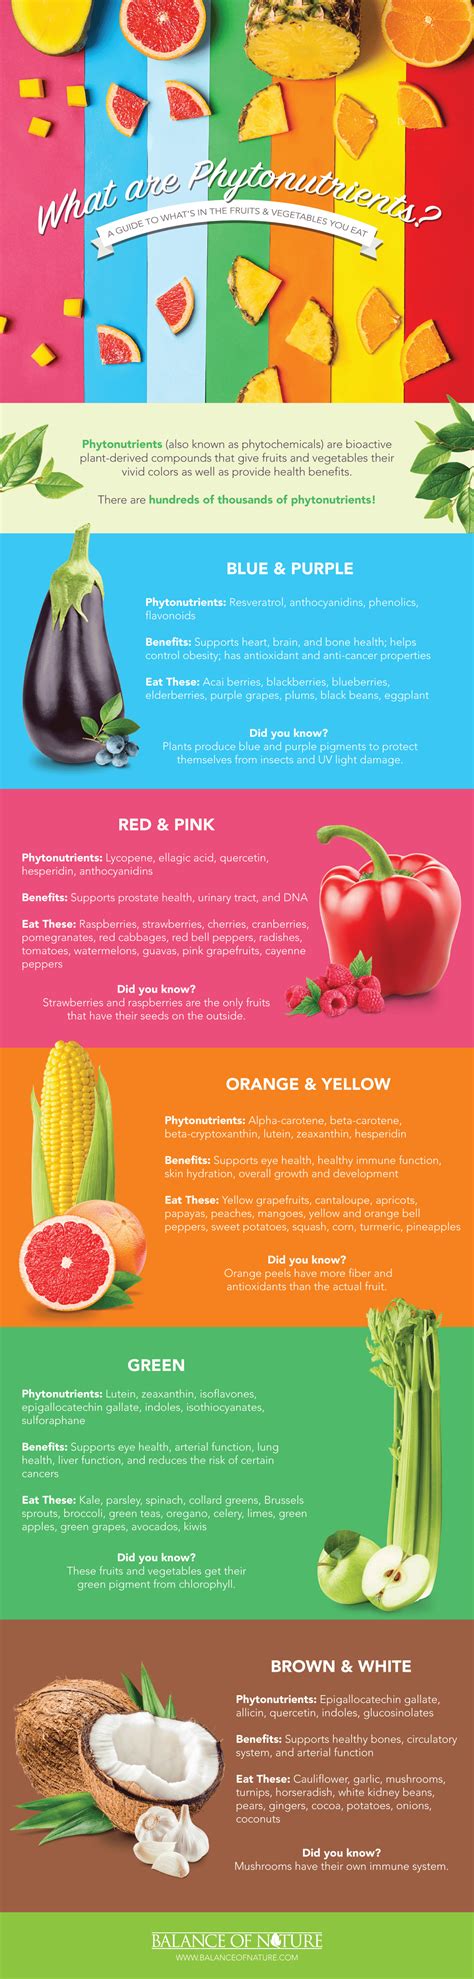 What Are Phytonutrients